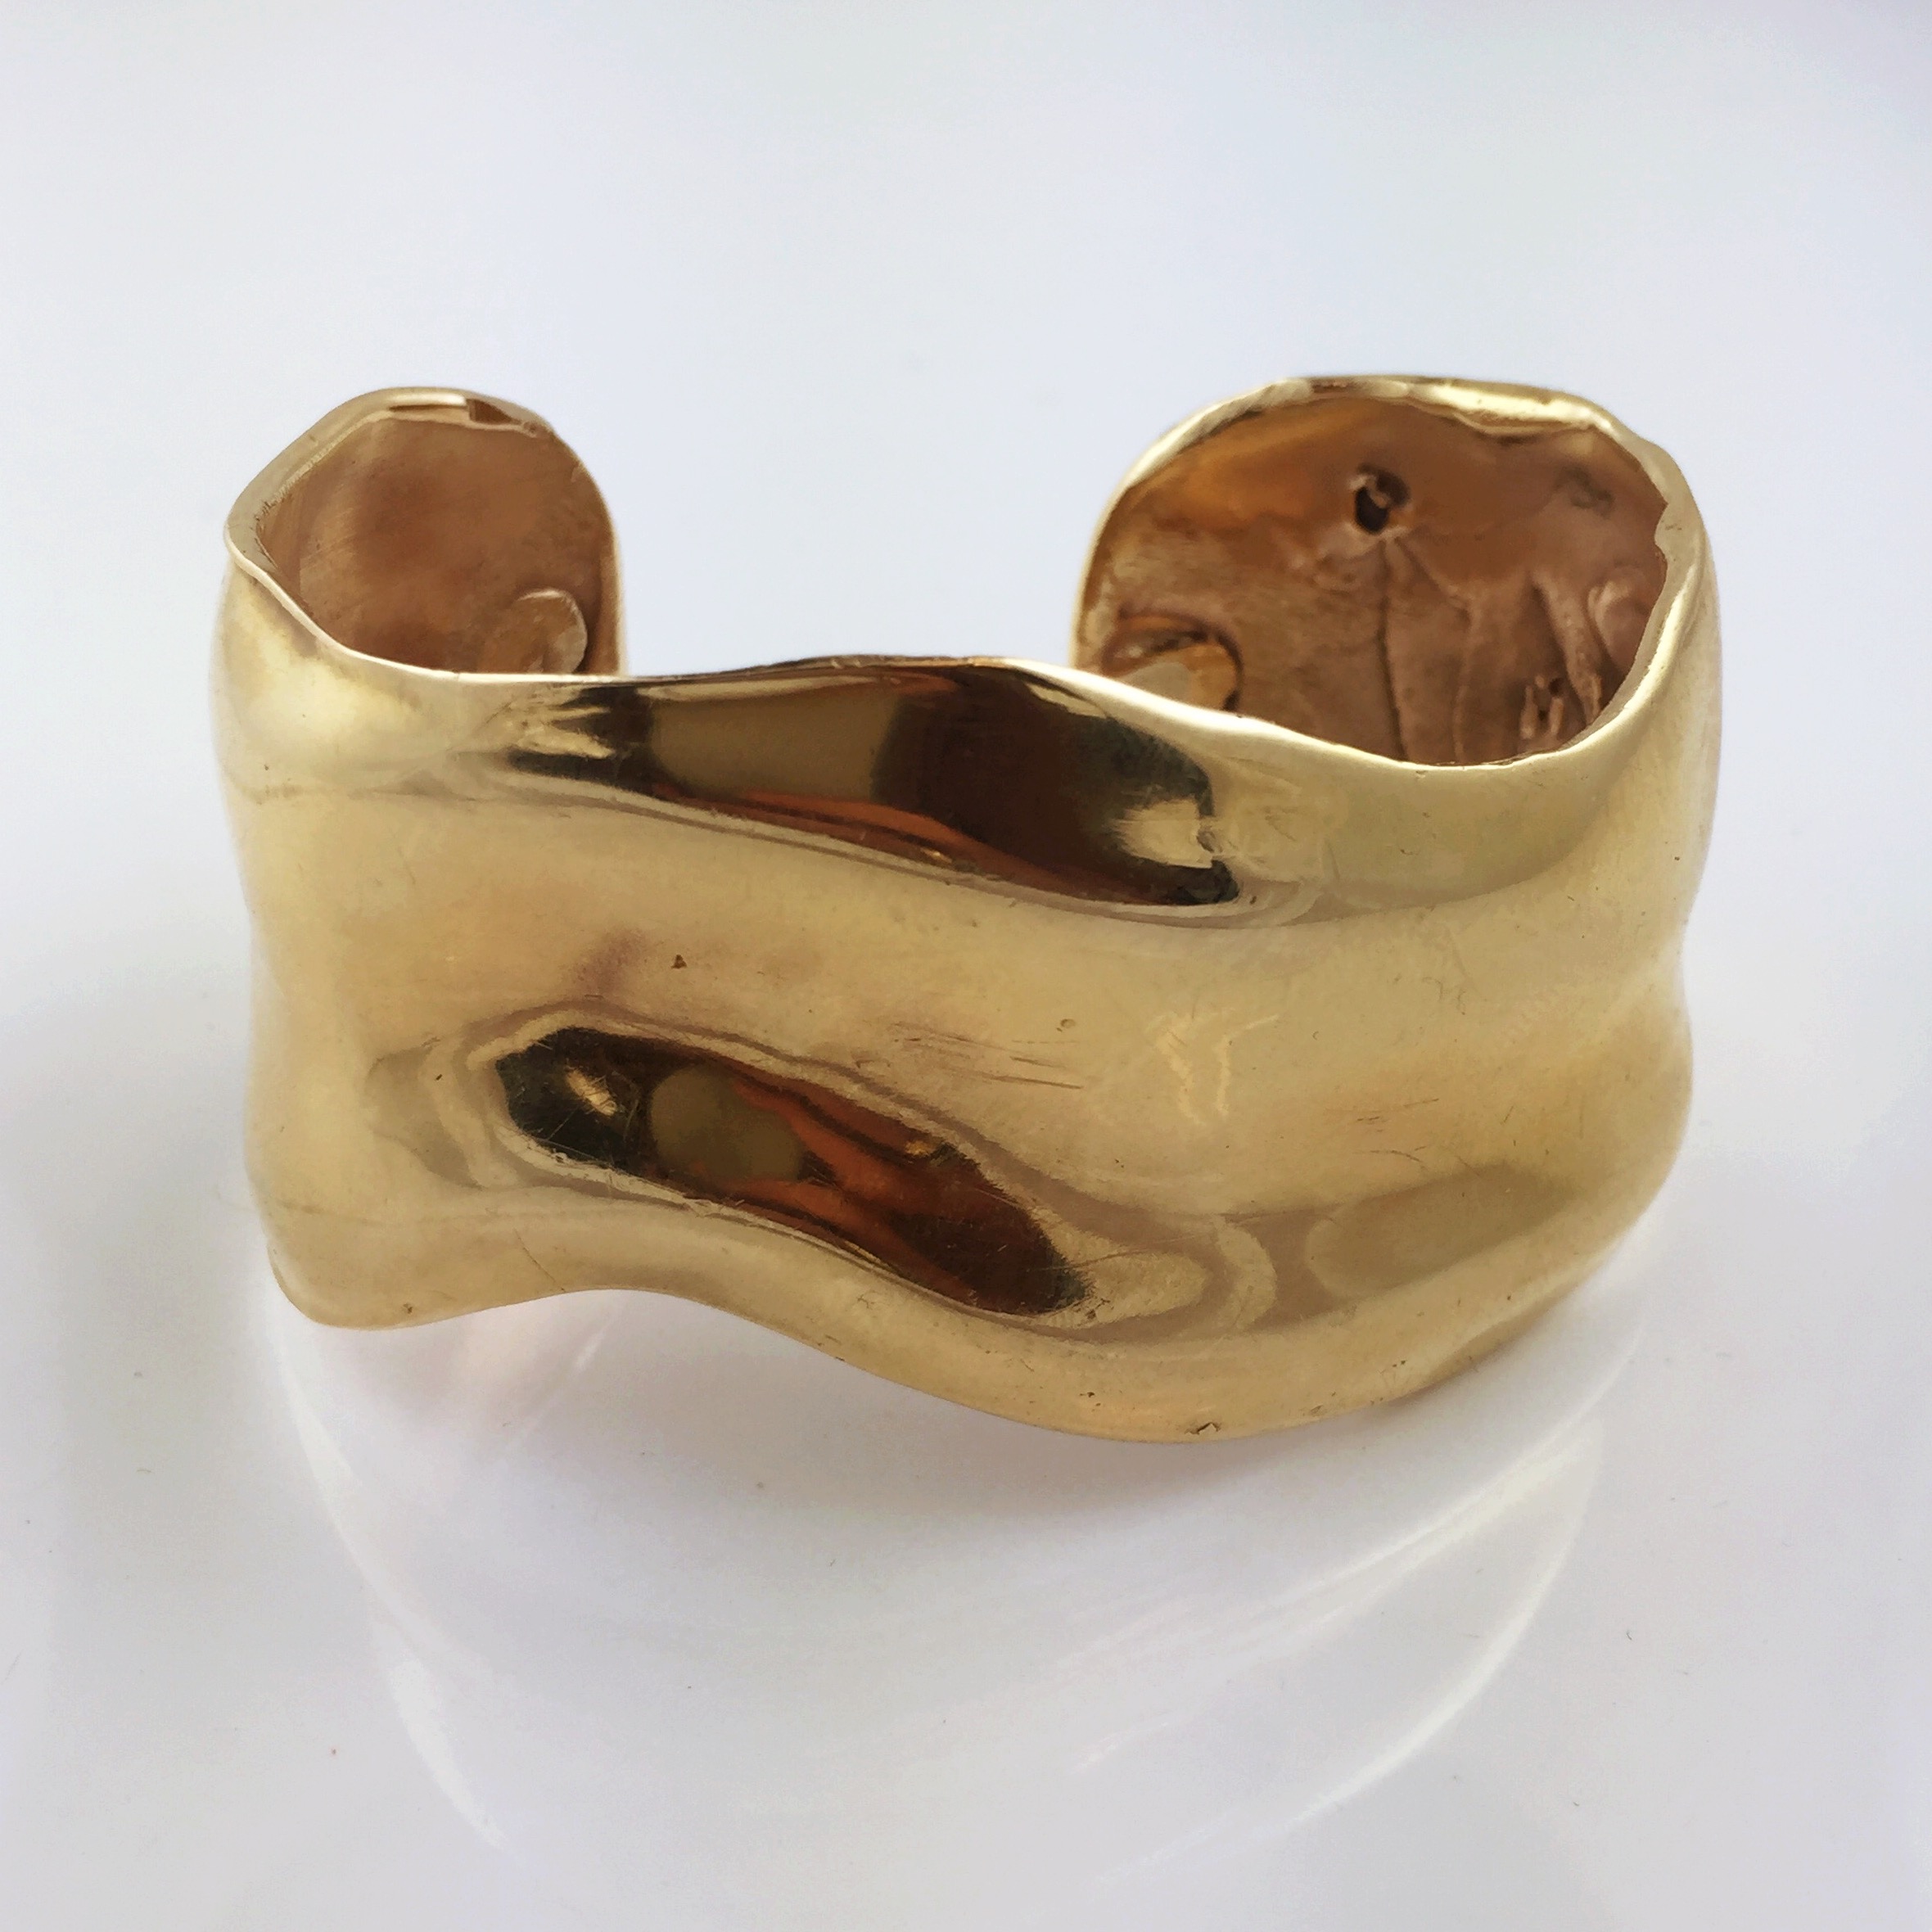  The gold cuff bracelet he made for his mother, and then gifted to his daughter on her 25th birthday.&nbsp; 